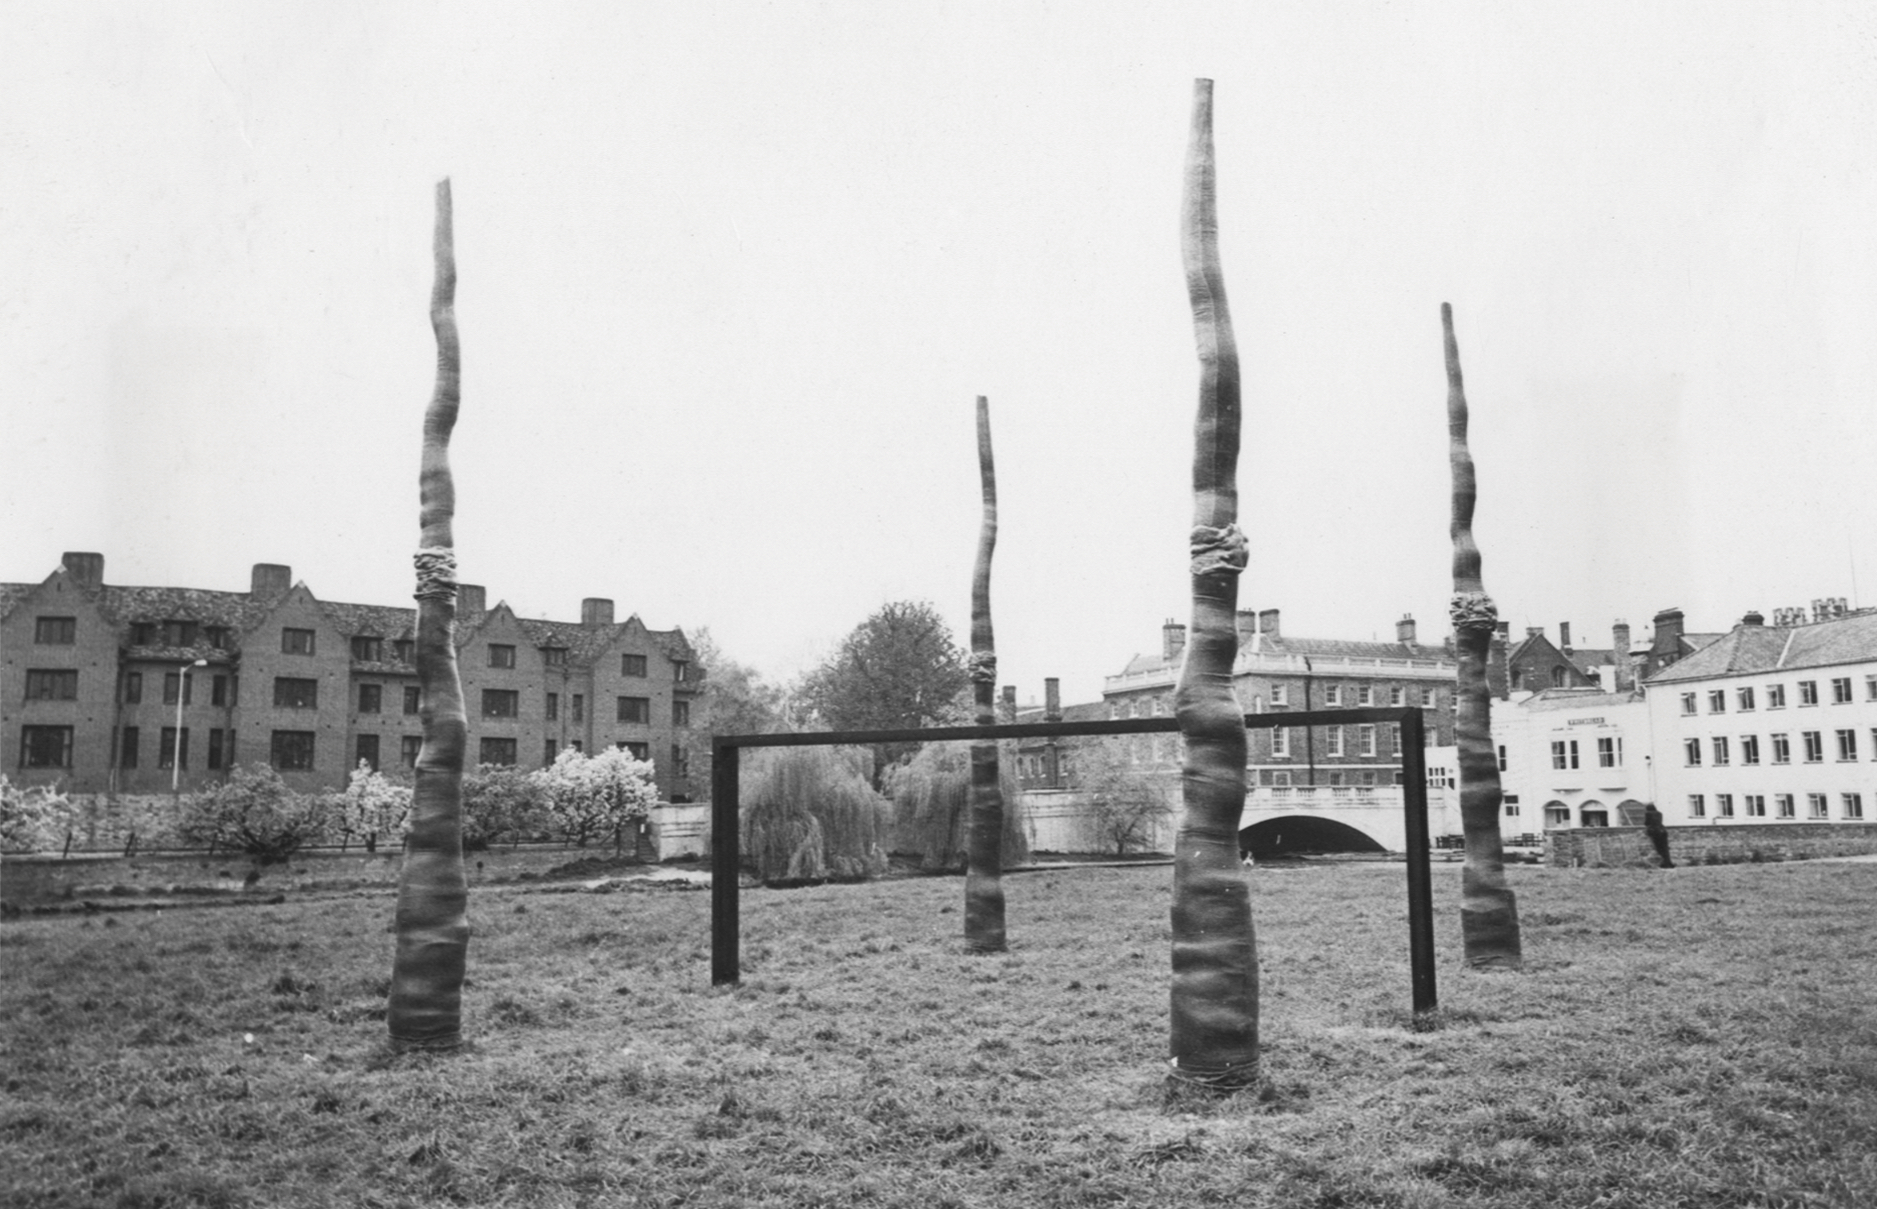 A black and white photograph of a public sculpture in a grassy area, with buildings at the edge of the image. The sculpture consists of four wiggly shapes reaching up to the sky, and in the centre a piece of metal that looks like football goalposts in black. 